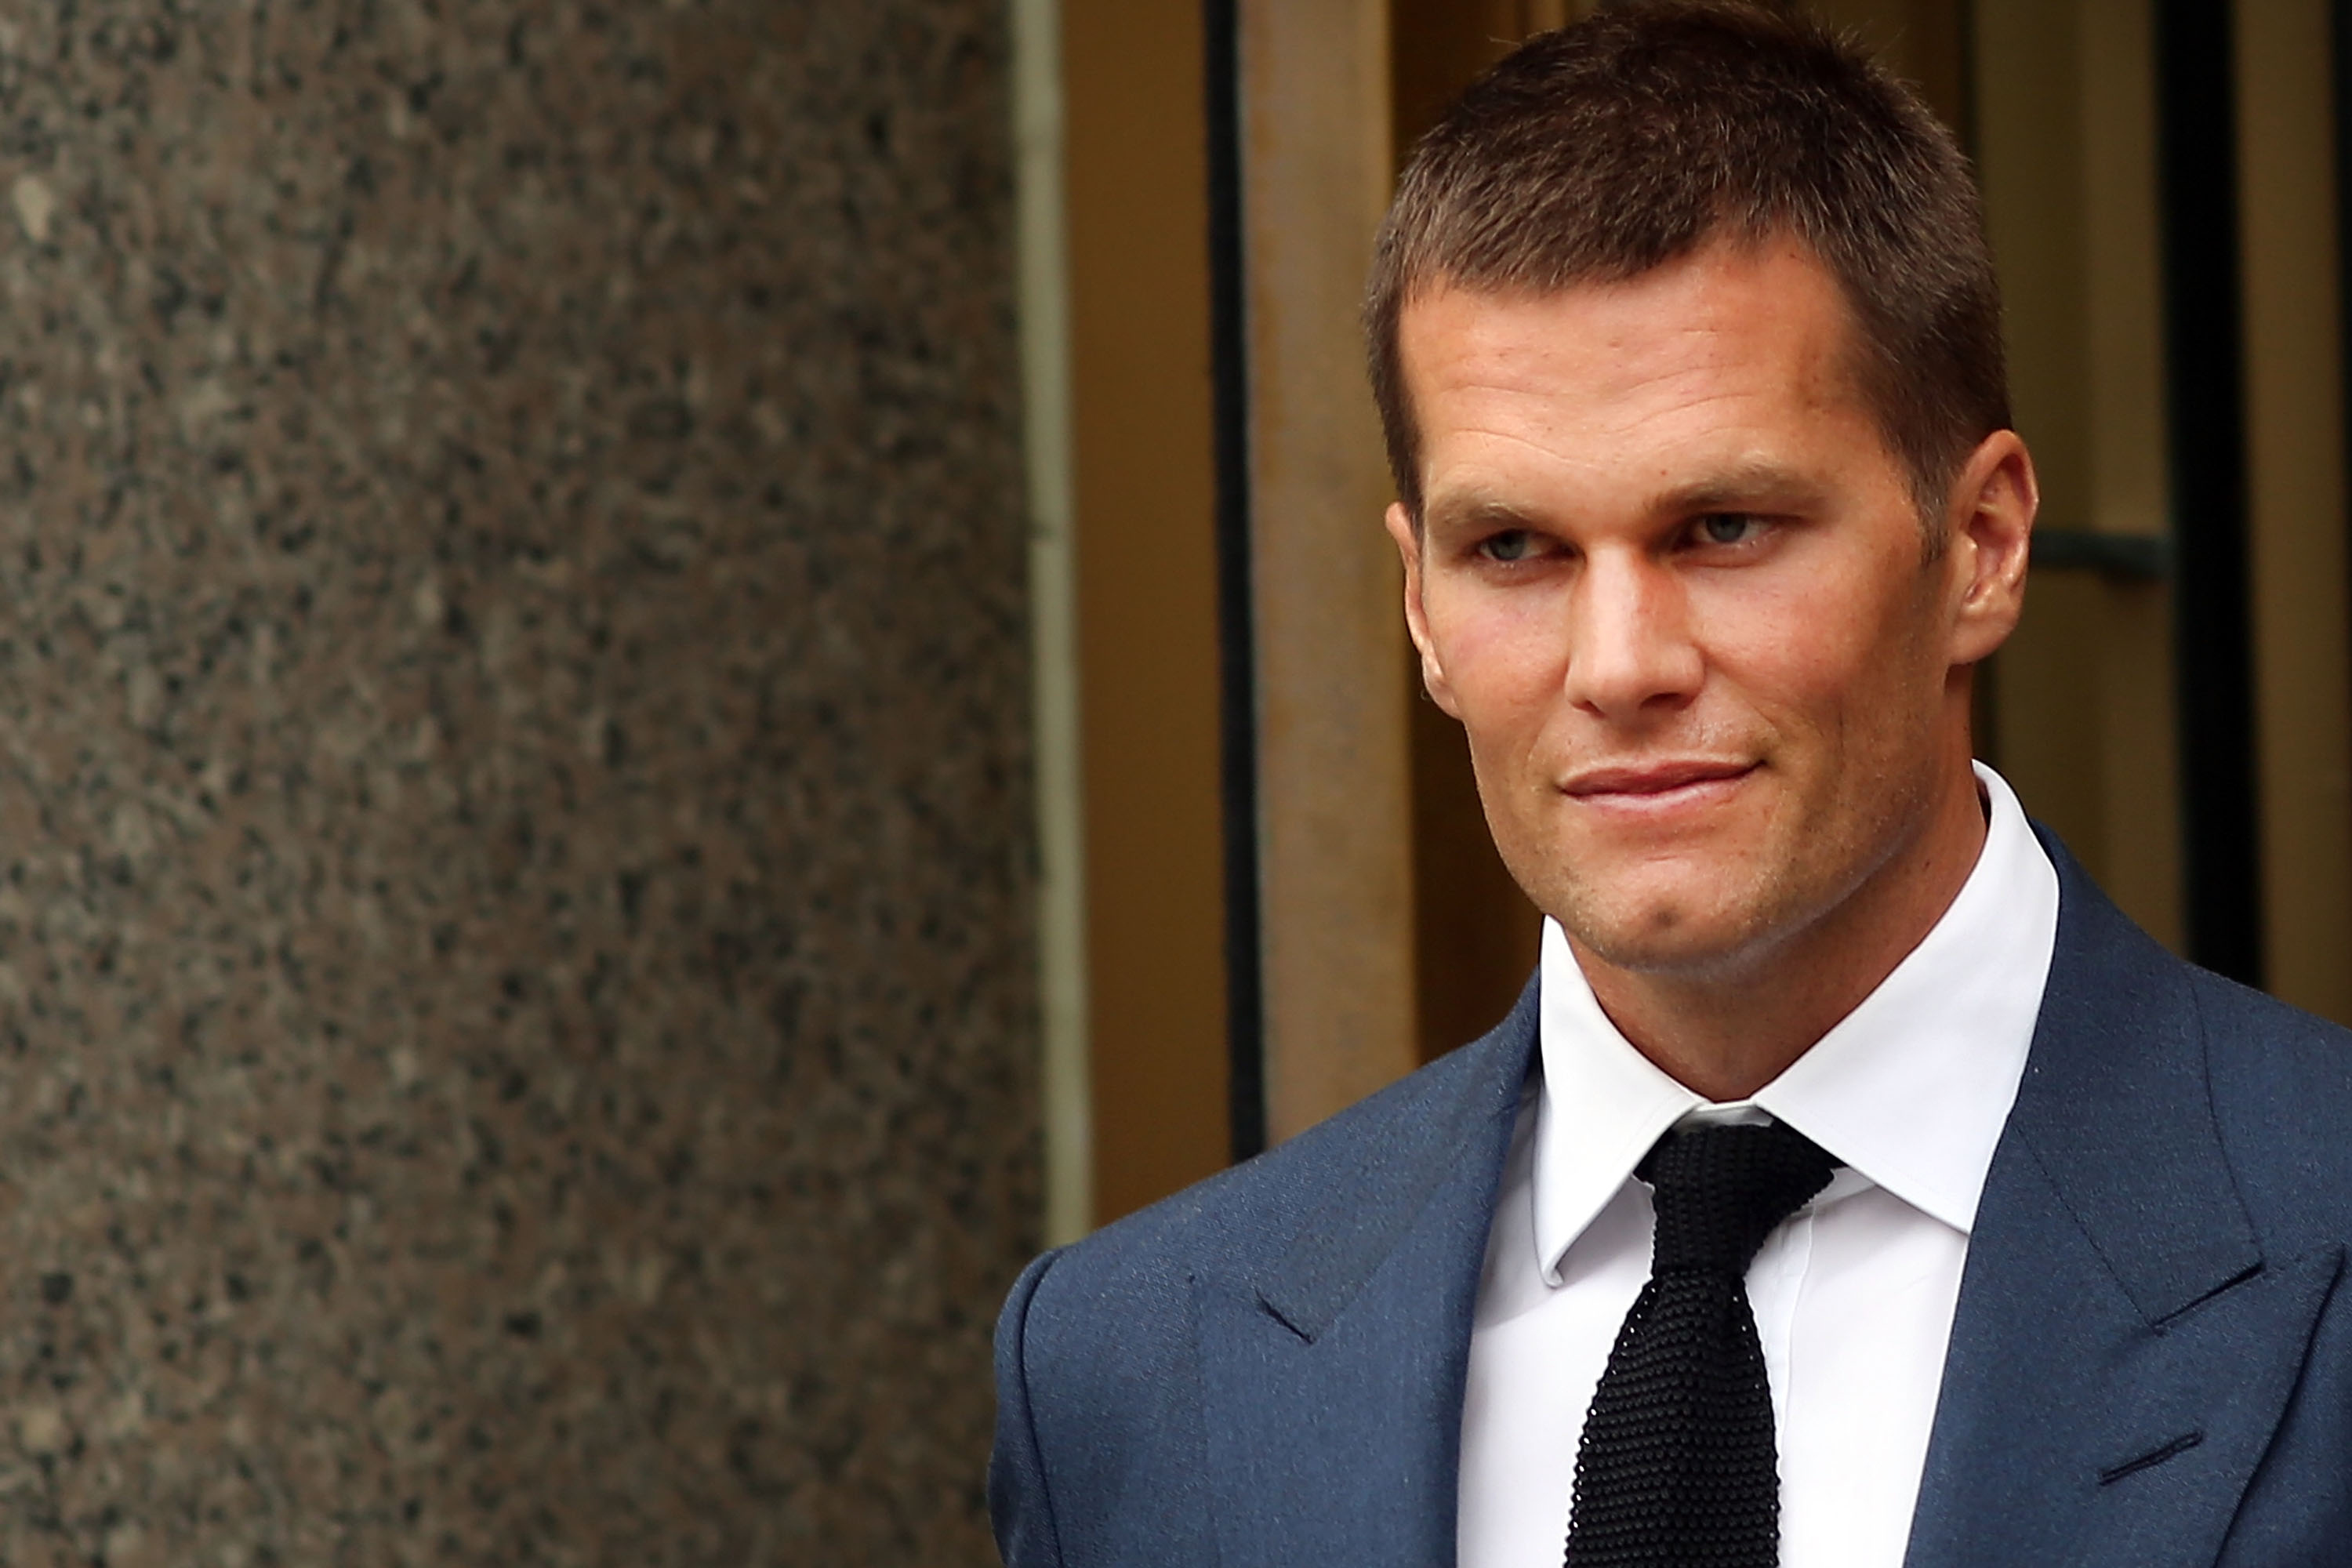 Quarterback Tom Brady of the New England Patriots leaves federal court after contesting his four game suspension with the NFL on August 31, 2015 in New York City. (Spencer Platt—Getty Images)